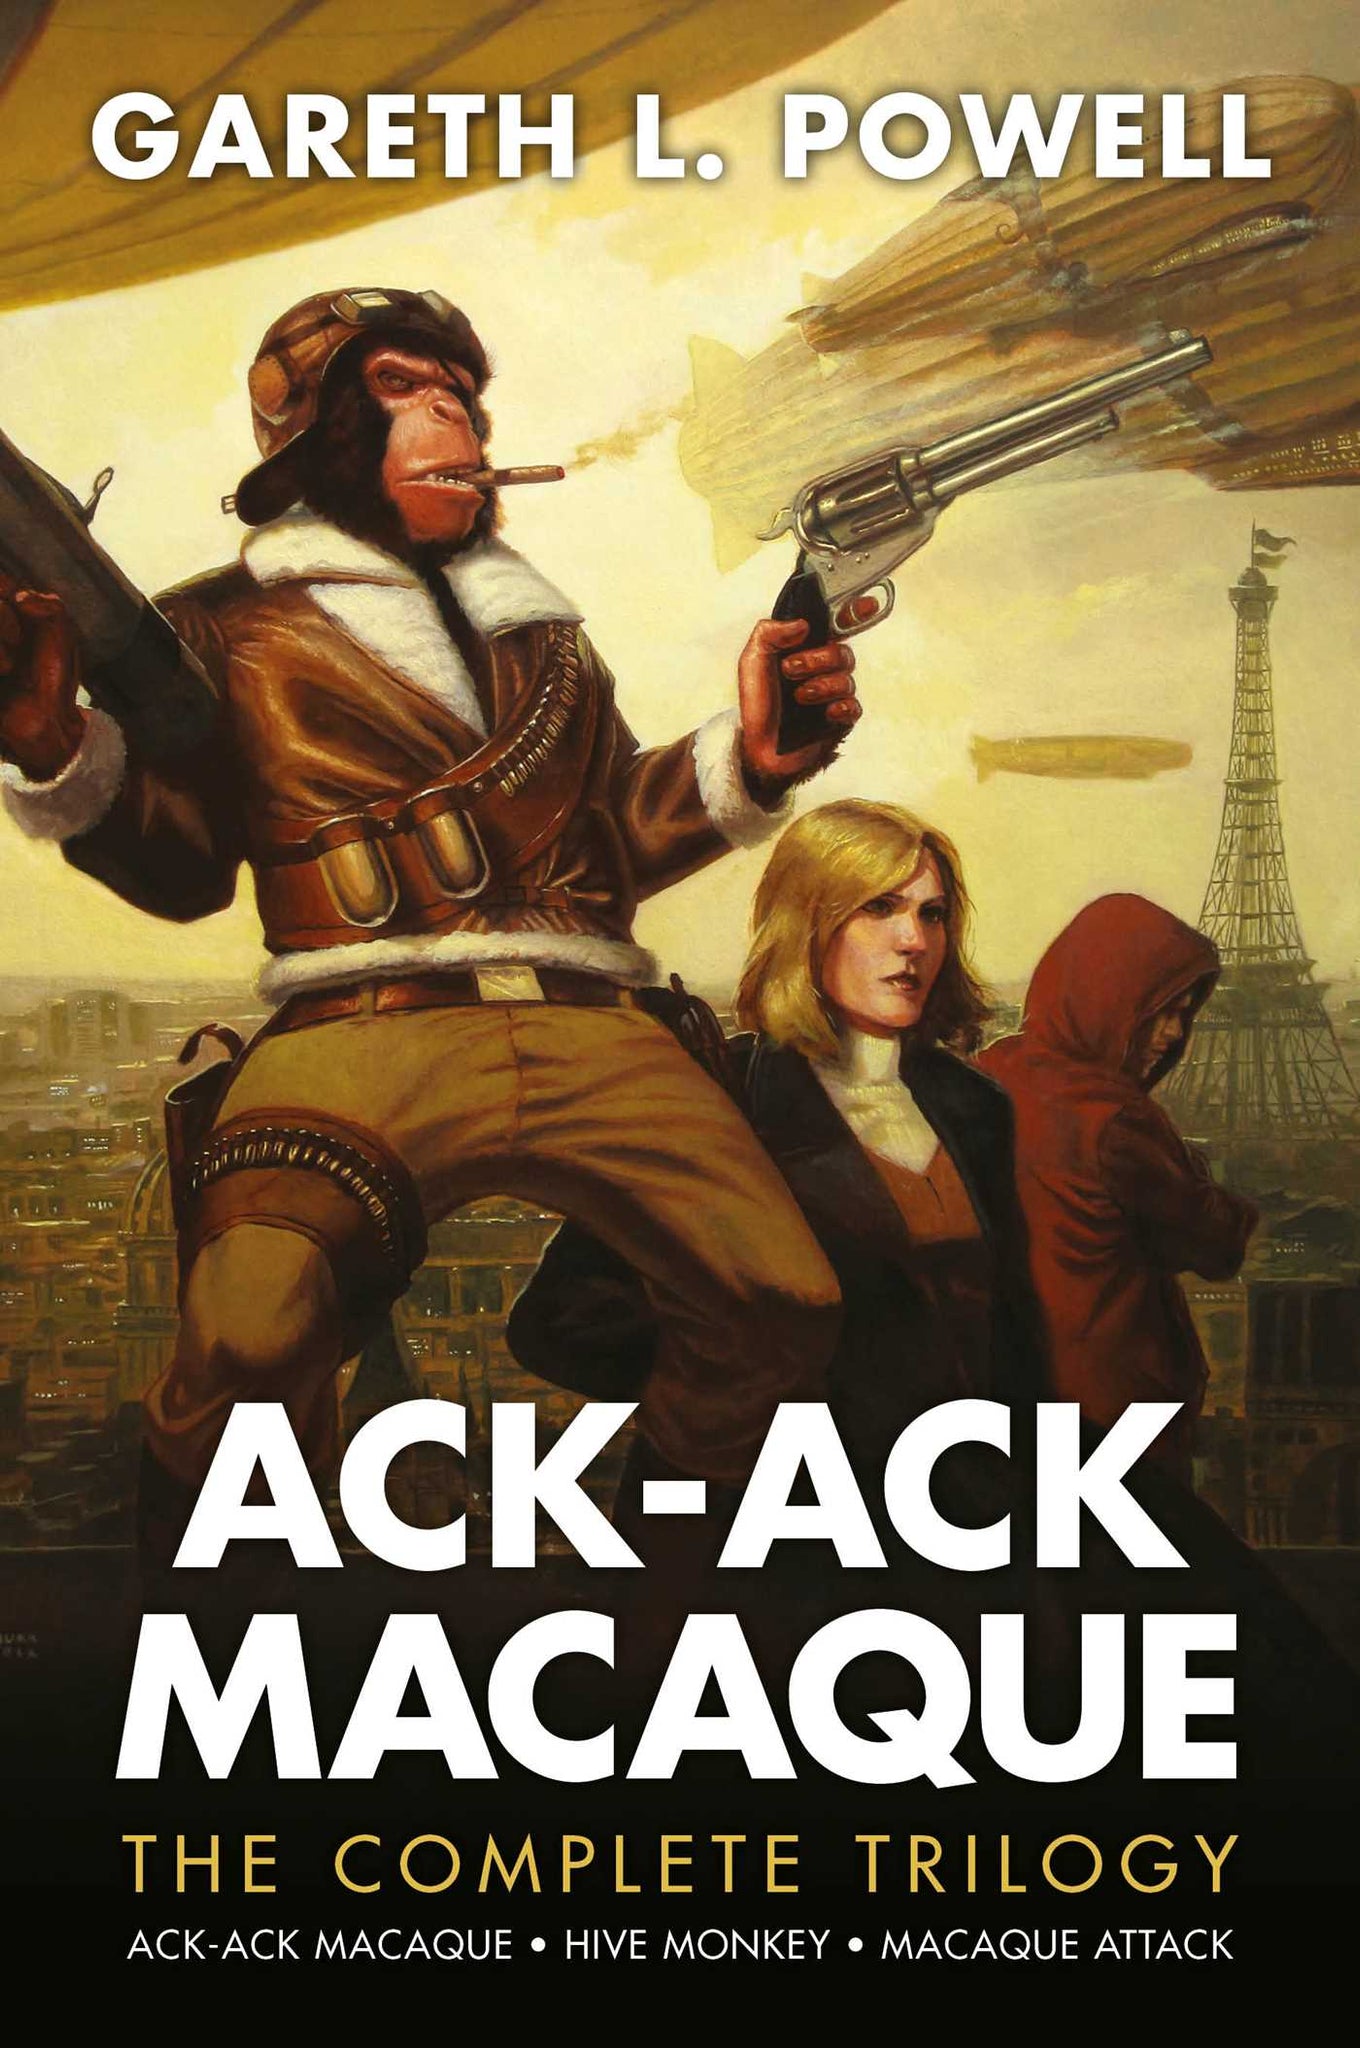 Ack-Ack Macaque: The Complete Trilogy